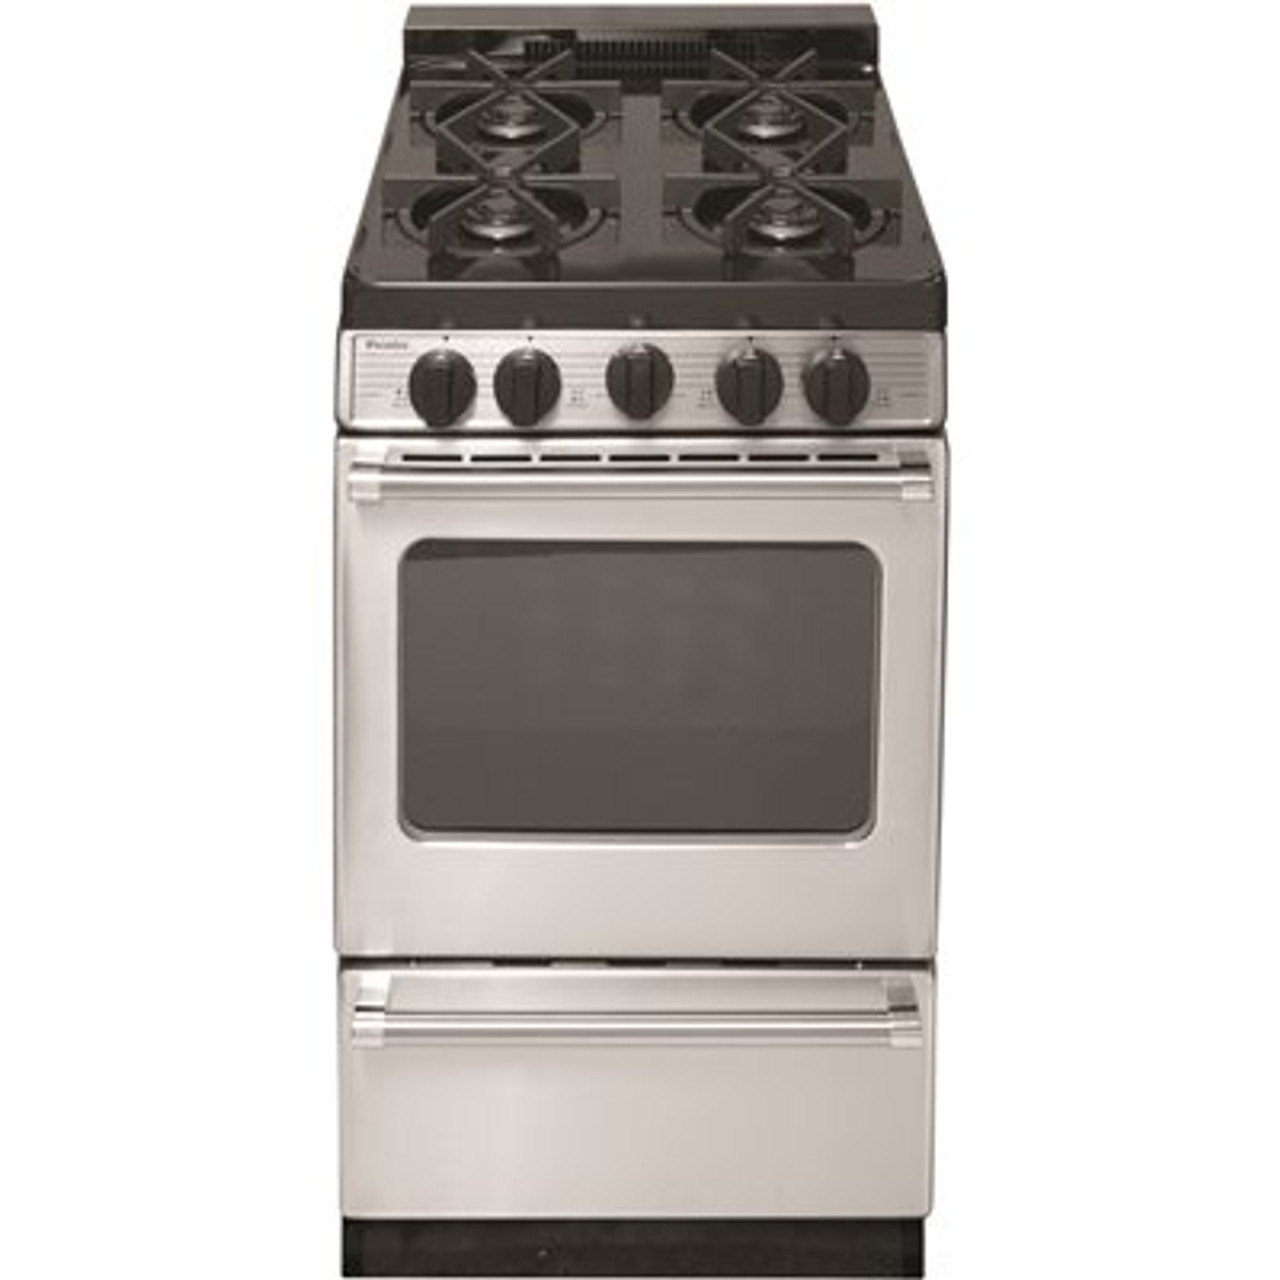 Premier Proseries 20 In. 2.42 Cu. Ft. Freestanding Gas Range With Sealed Burners In Stainless Steel - 207173022